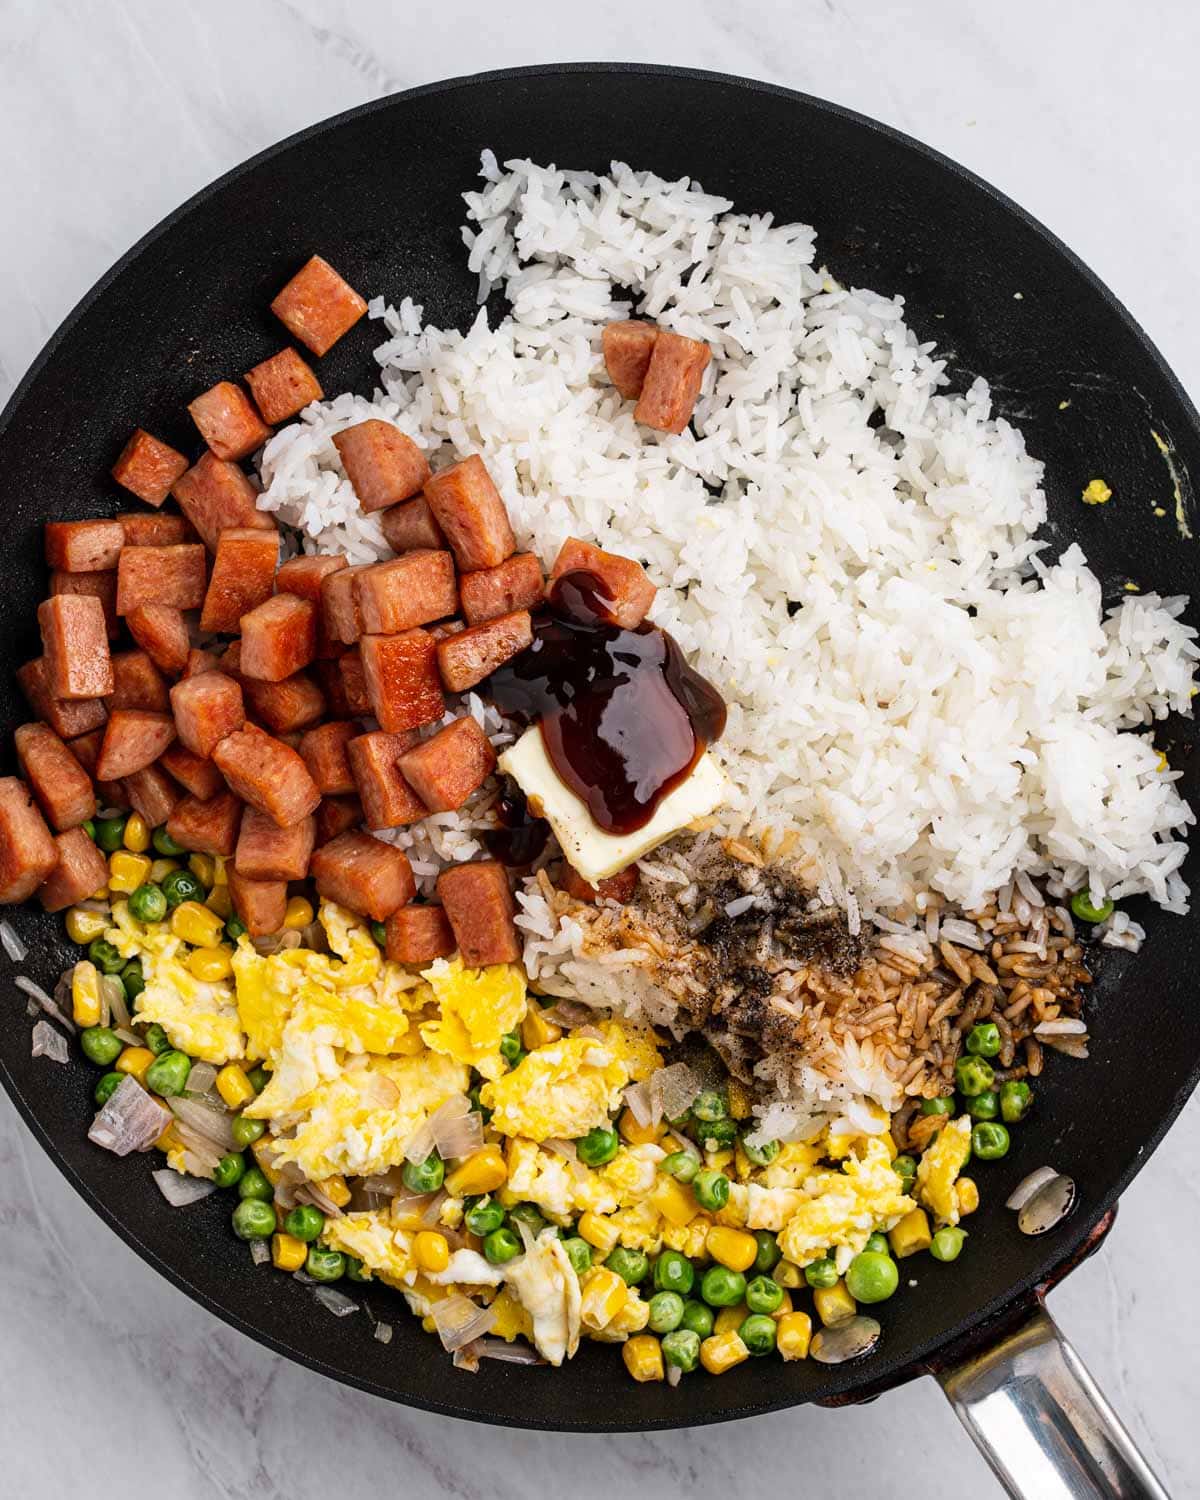 Pan with sections of rice, vegetables, scrambled eggs, spam, seasoning, and butter.